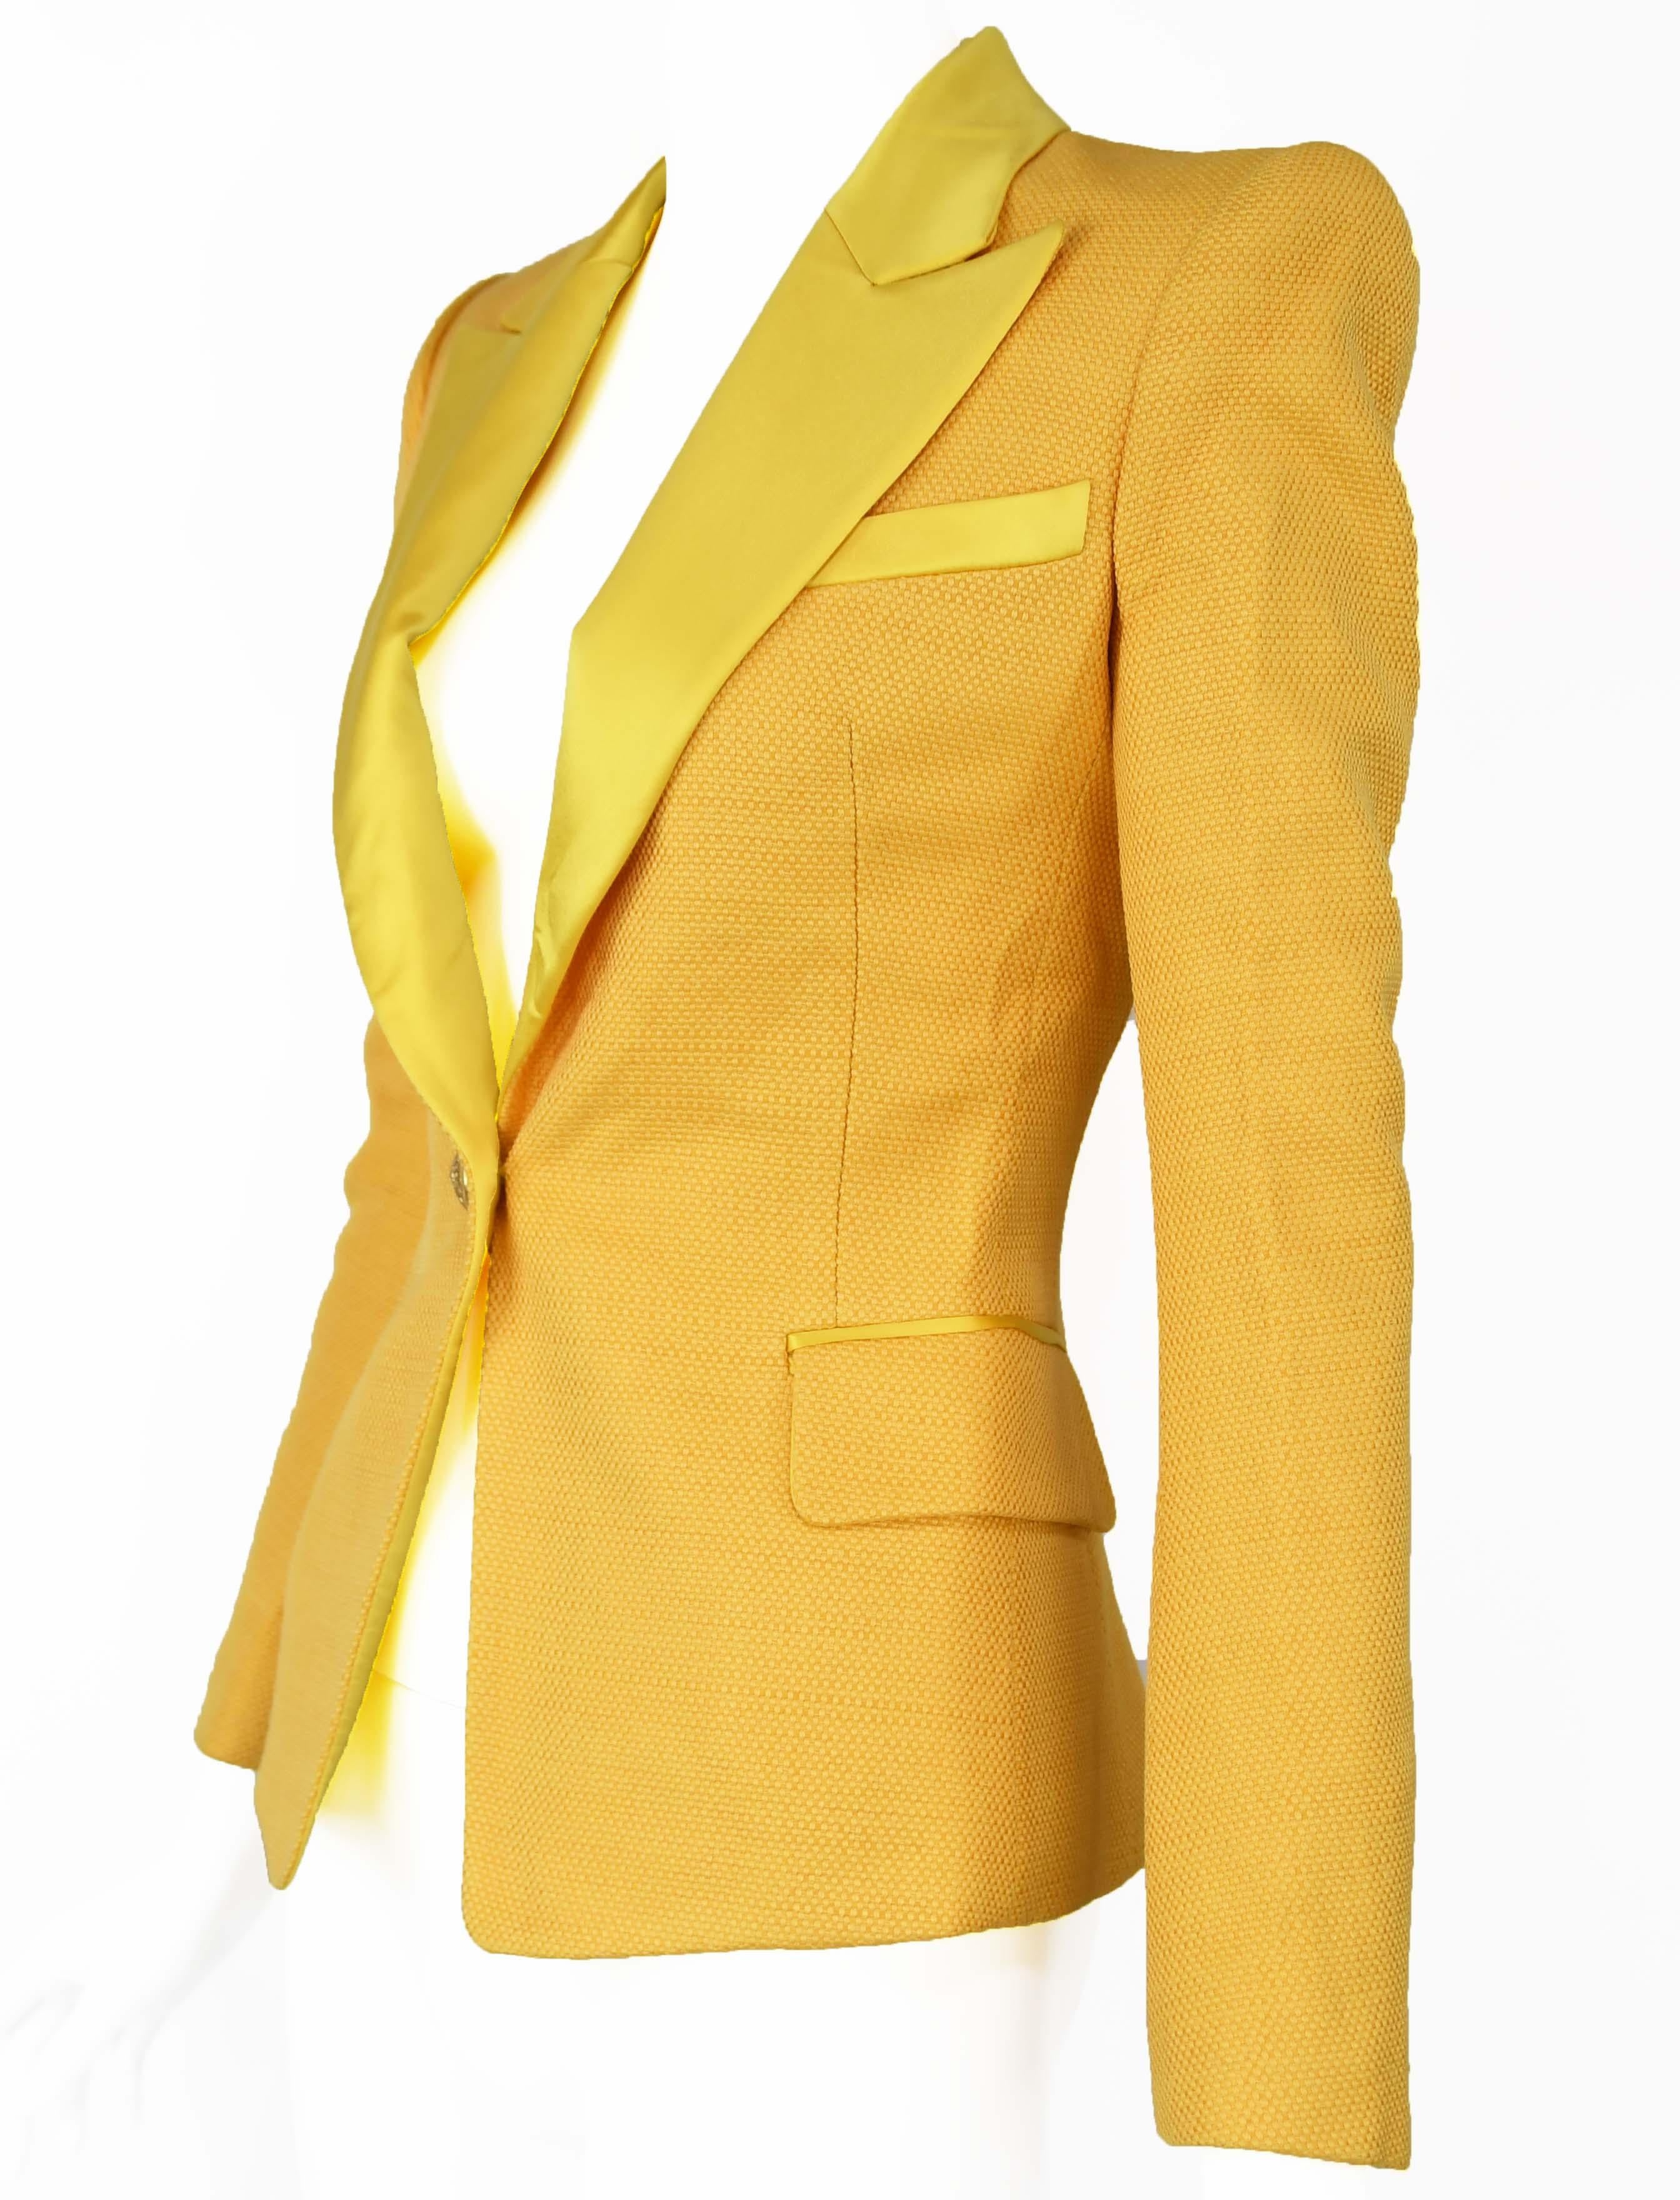 Single breasted bright yellow Balmain pique blazer with satin collar.  Gold button with Indian head.  Brand new item with original tags.

Condition: Brand new with original tags

Composition: 100% viscose / (collar) 100% silk / (lining) 52% viscose,